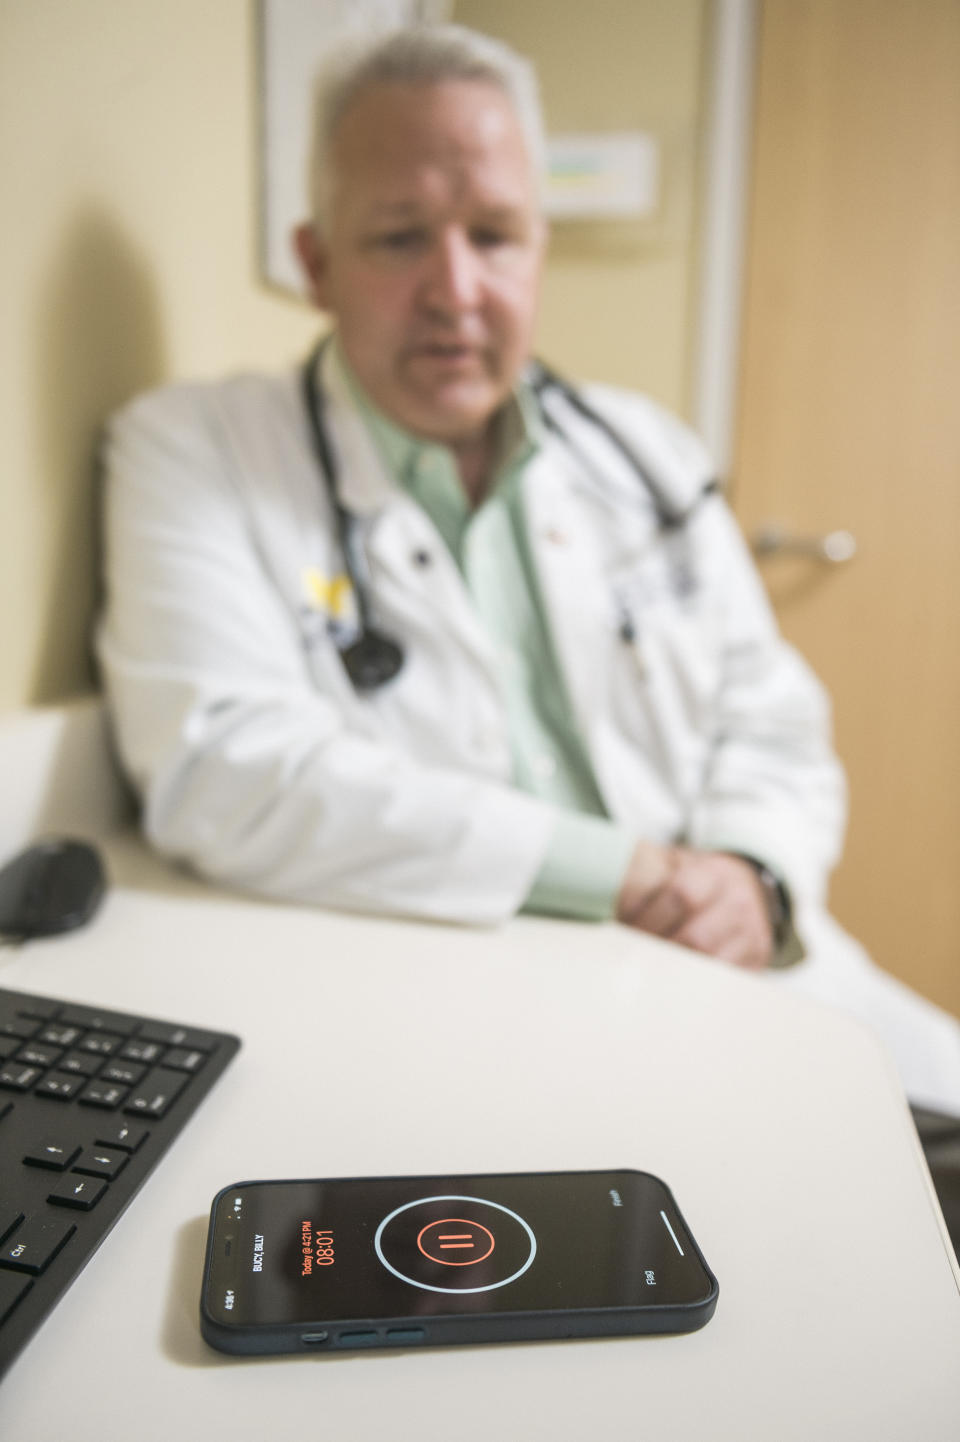 In this photo provided by University of Michigan Health-West, Dr. Lance Owens, chief medical information officer at the university, demonstrates the use of an AI tool on a smartphone in Wyoming, Mich., on Sept. 9, 2021. The software listens to a doctor-patient conversation, documents and organizes it to write a clinical note. (University of Michigan Health-West via AP)